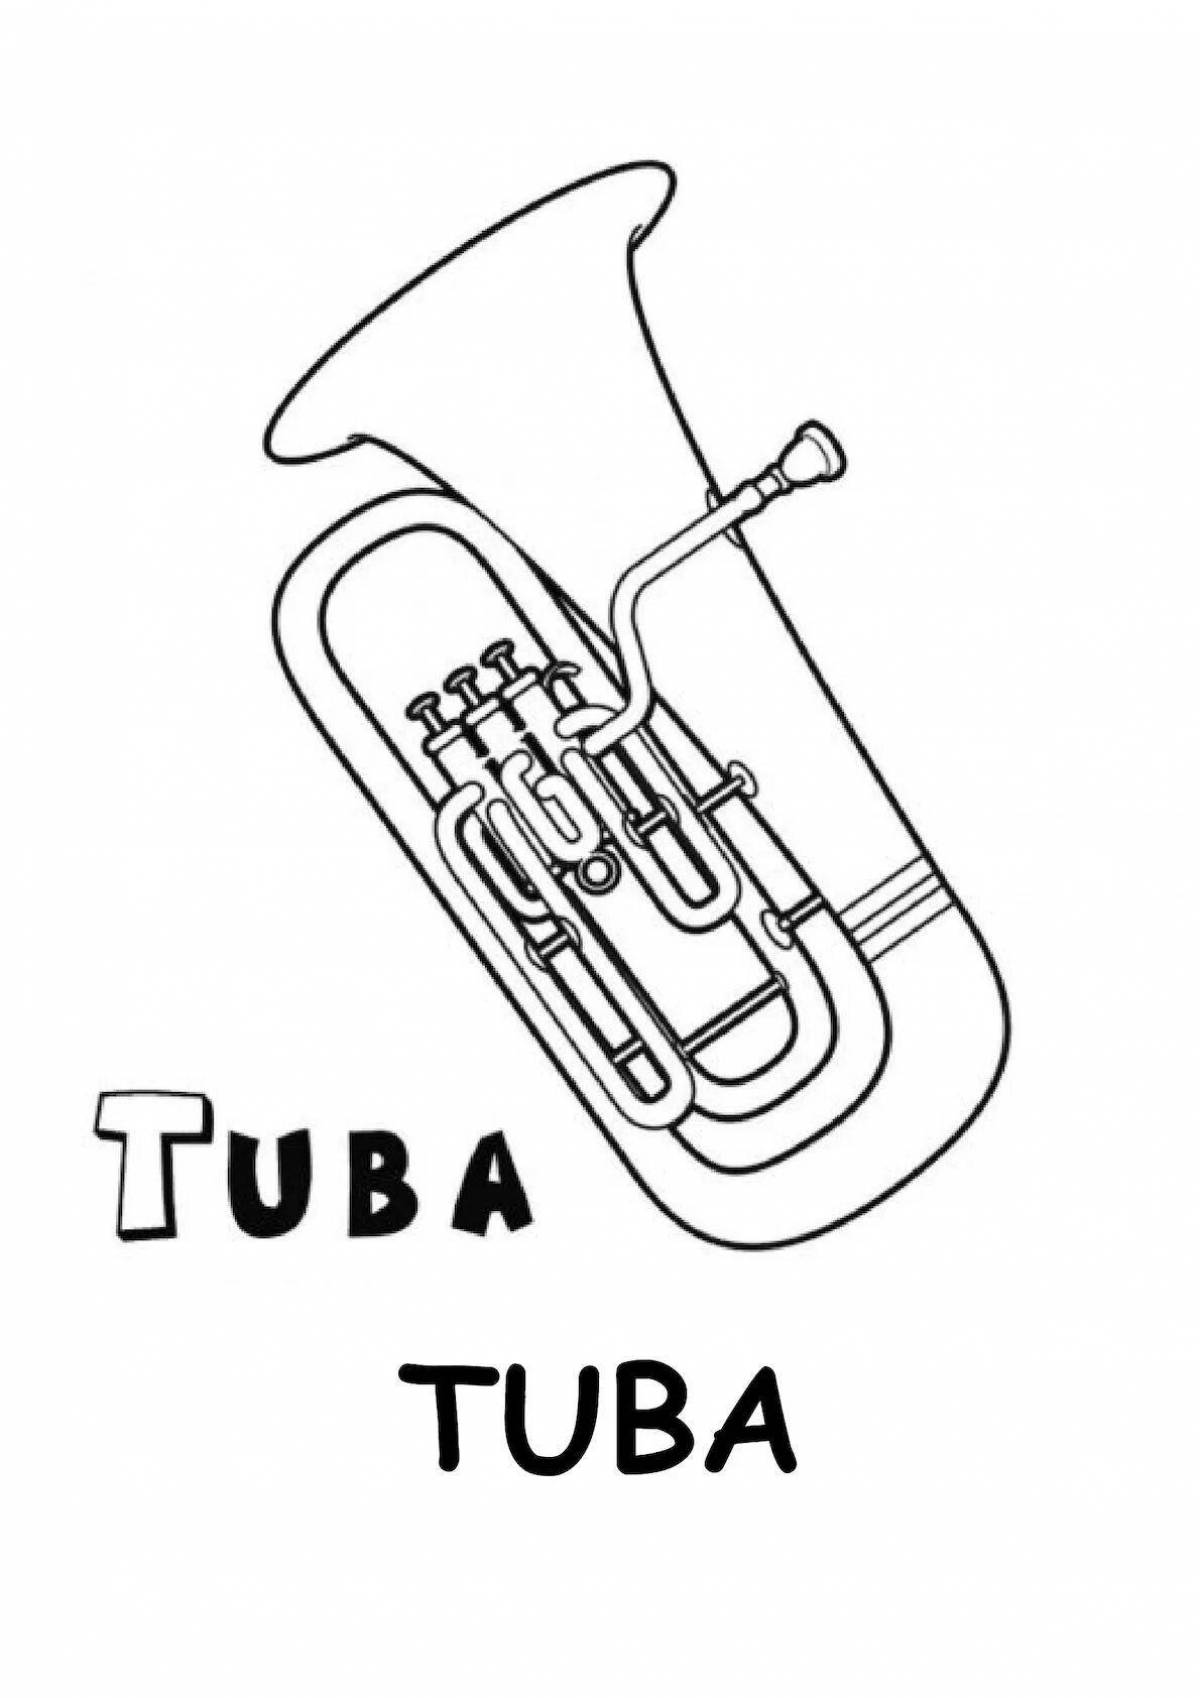 Outstanding trumpet coloring page for kids